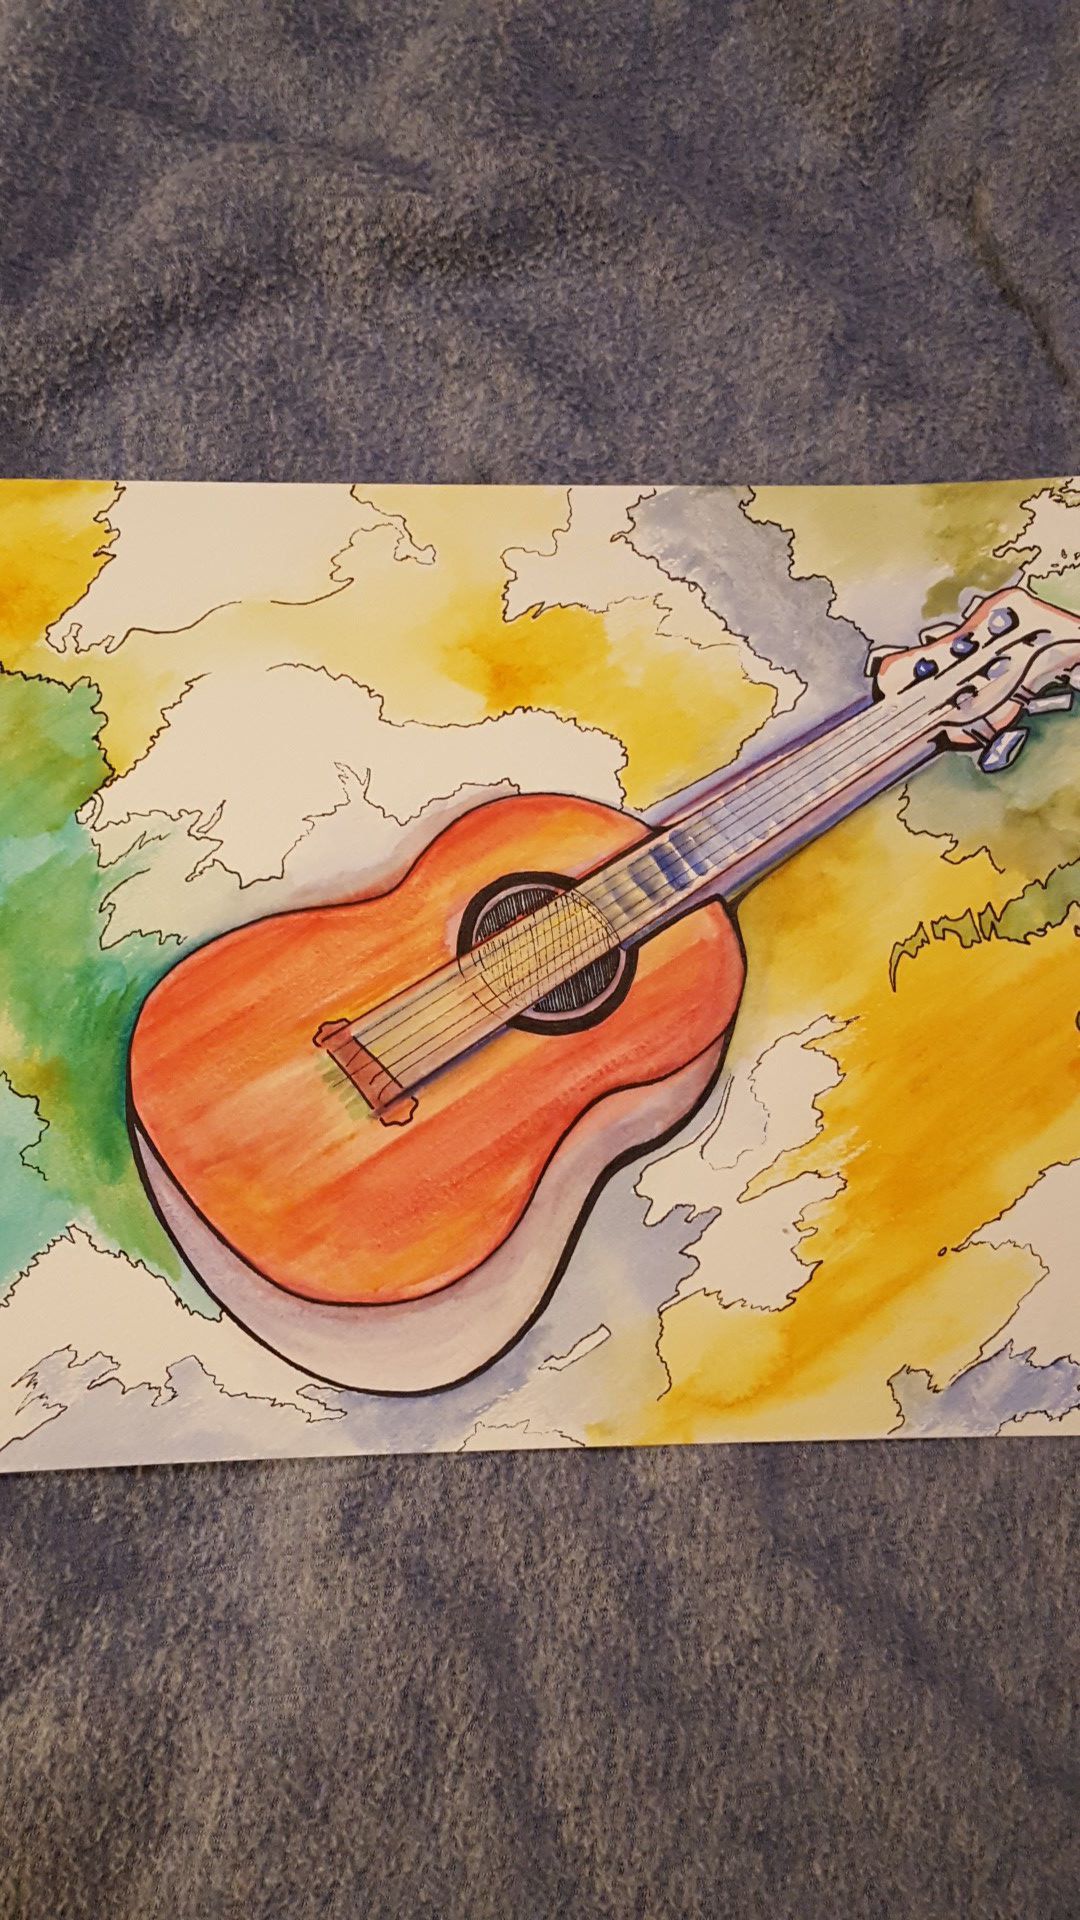 Guitar watercolor 15"x11" one of a kind